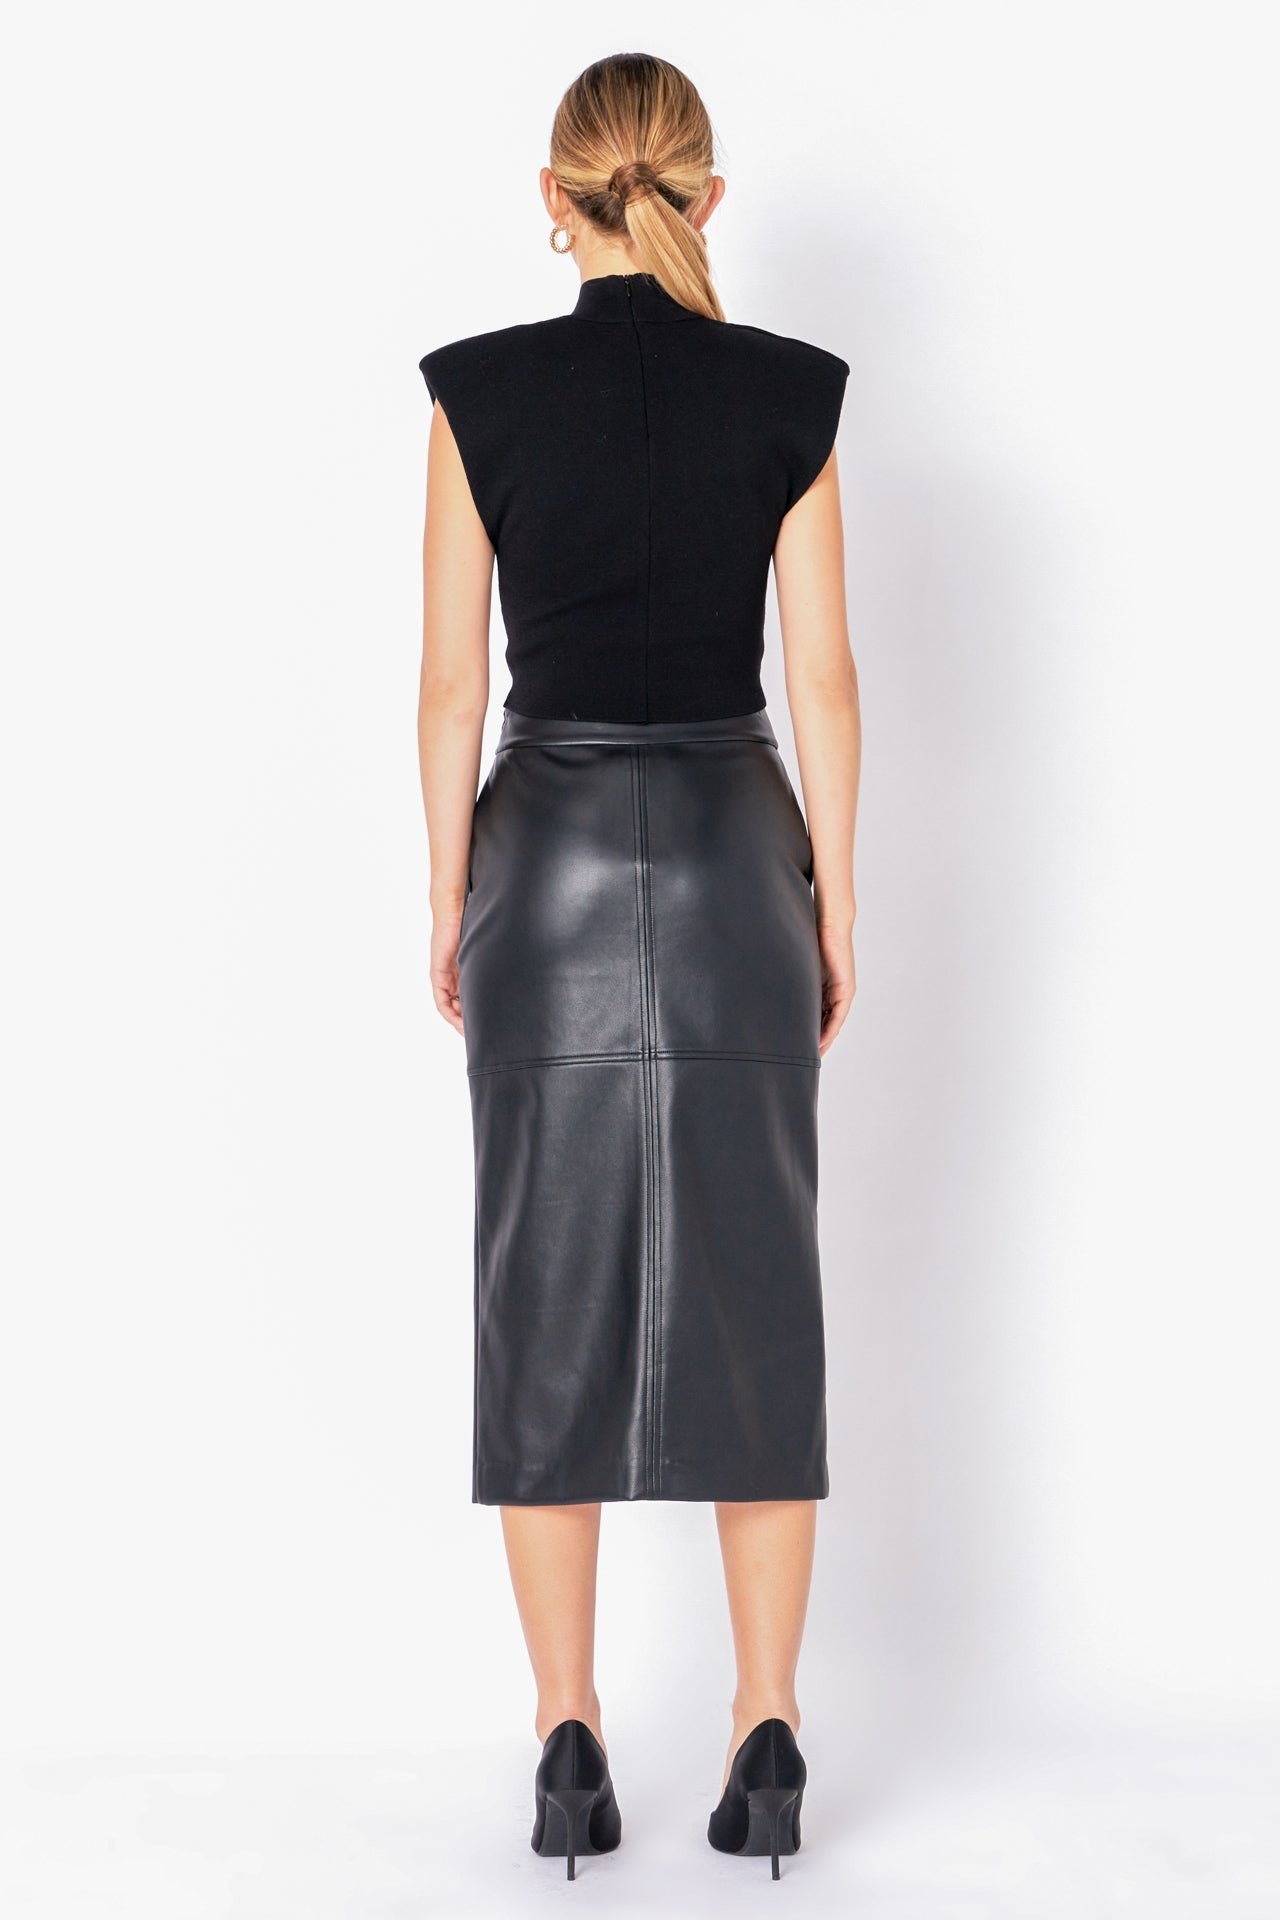 ENDLESS ROSE - Leather Front Slit Midi Skirt - SKIRTS available at Objectrare